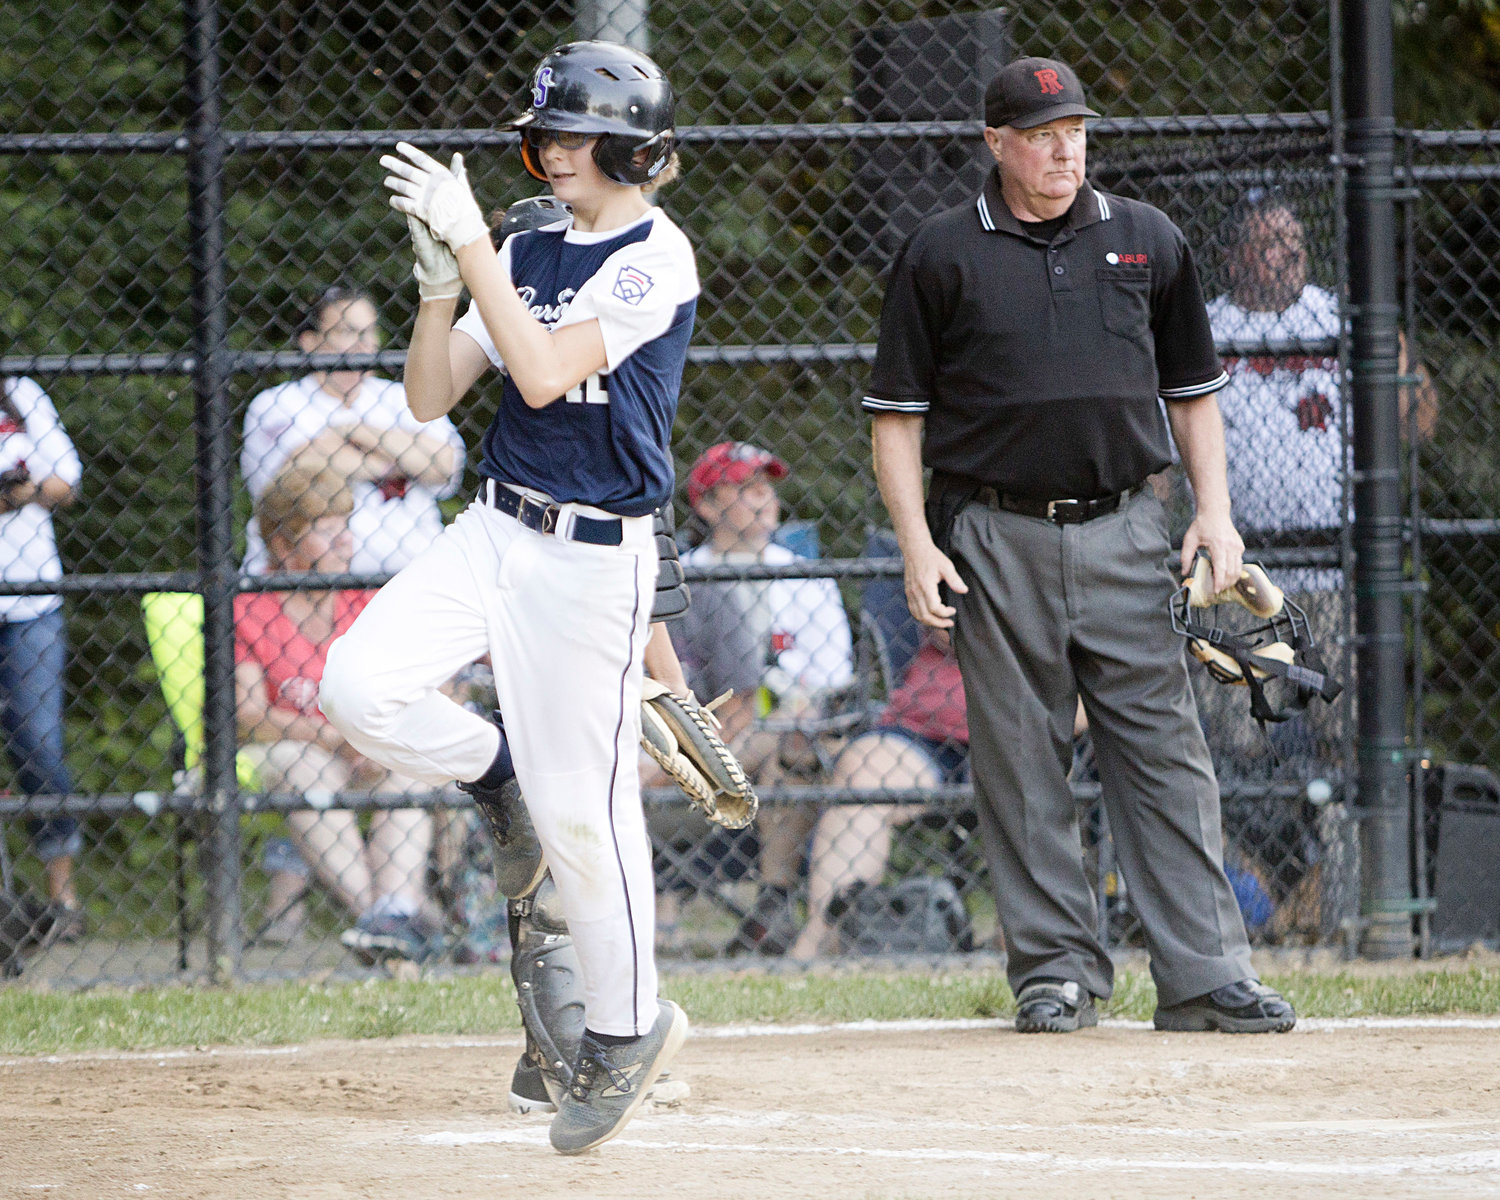 Finn Loverme claps after scoring a run in the last inning of the 12U All-Stars playoffs, against East Providence, Saturday.